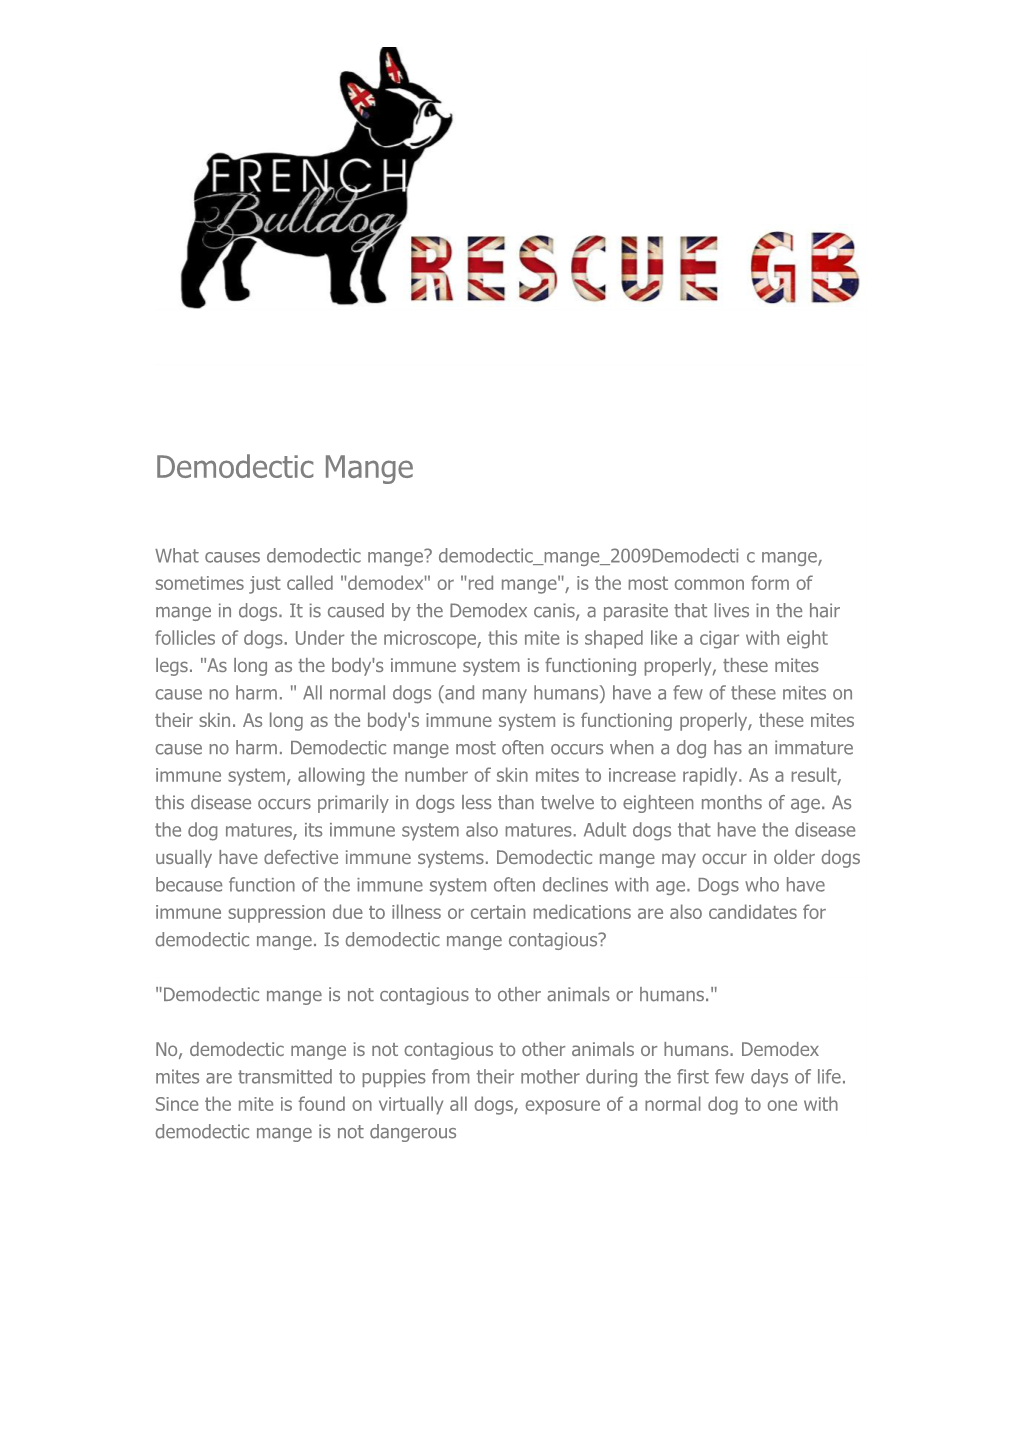 Demodectic Mange Is Not Contagious to Other Animals Or Humans